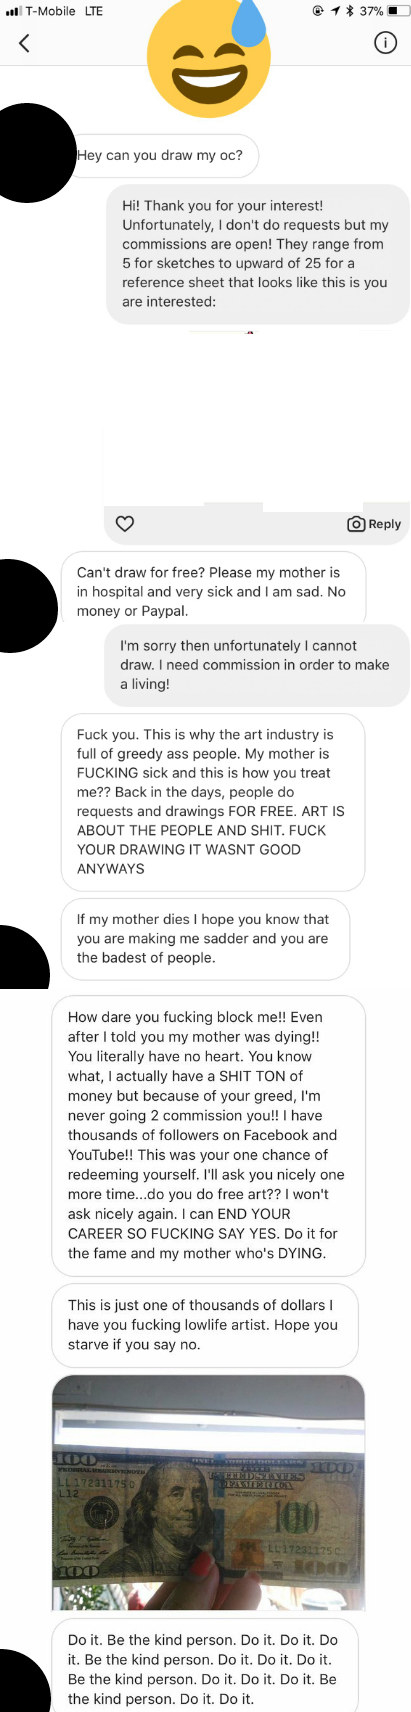 Person curses out artist for not drawing for free and says their mother is sick in the hospital and the art industry is full of greedy people